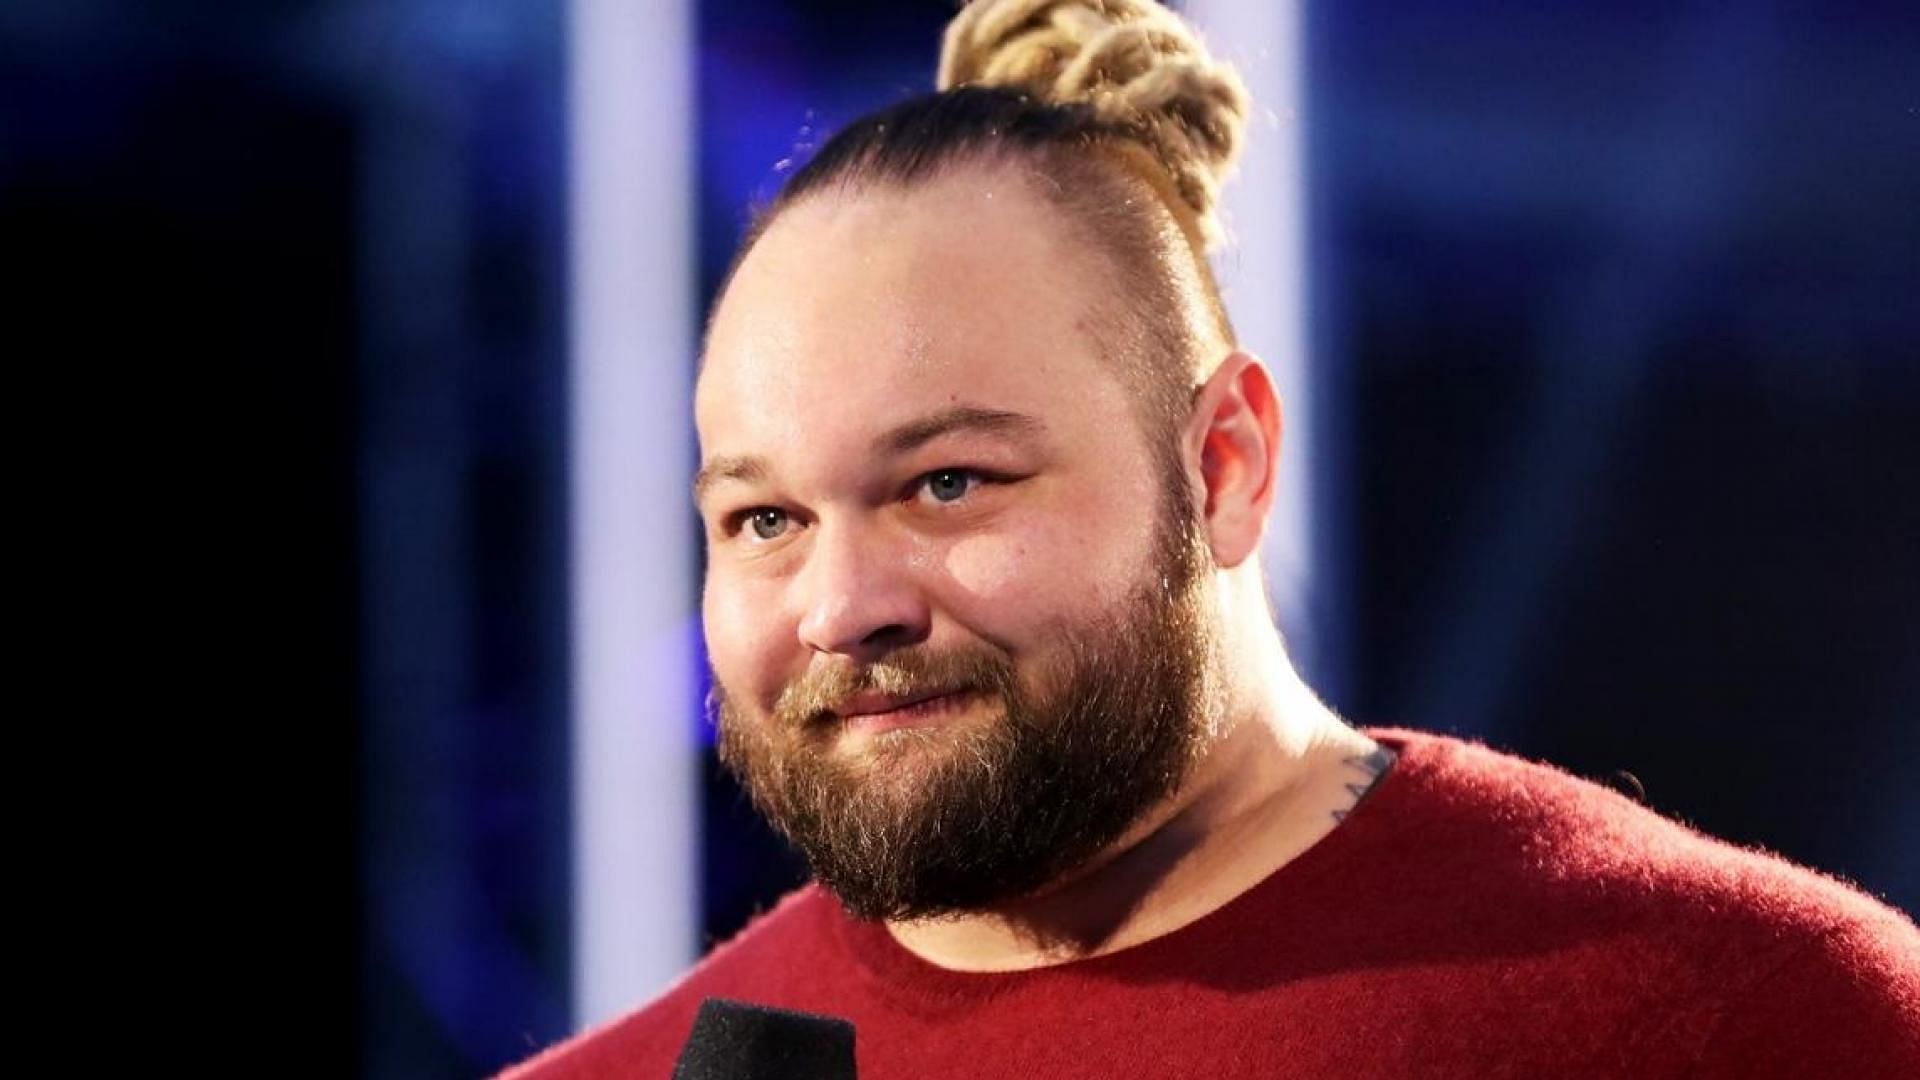 Bray Wyatt shared a touching recollection on Twitter